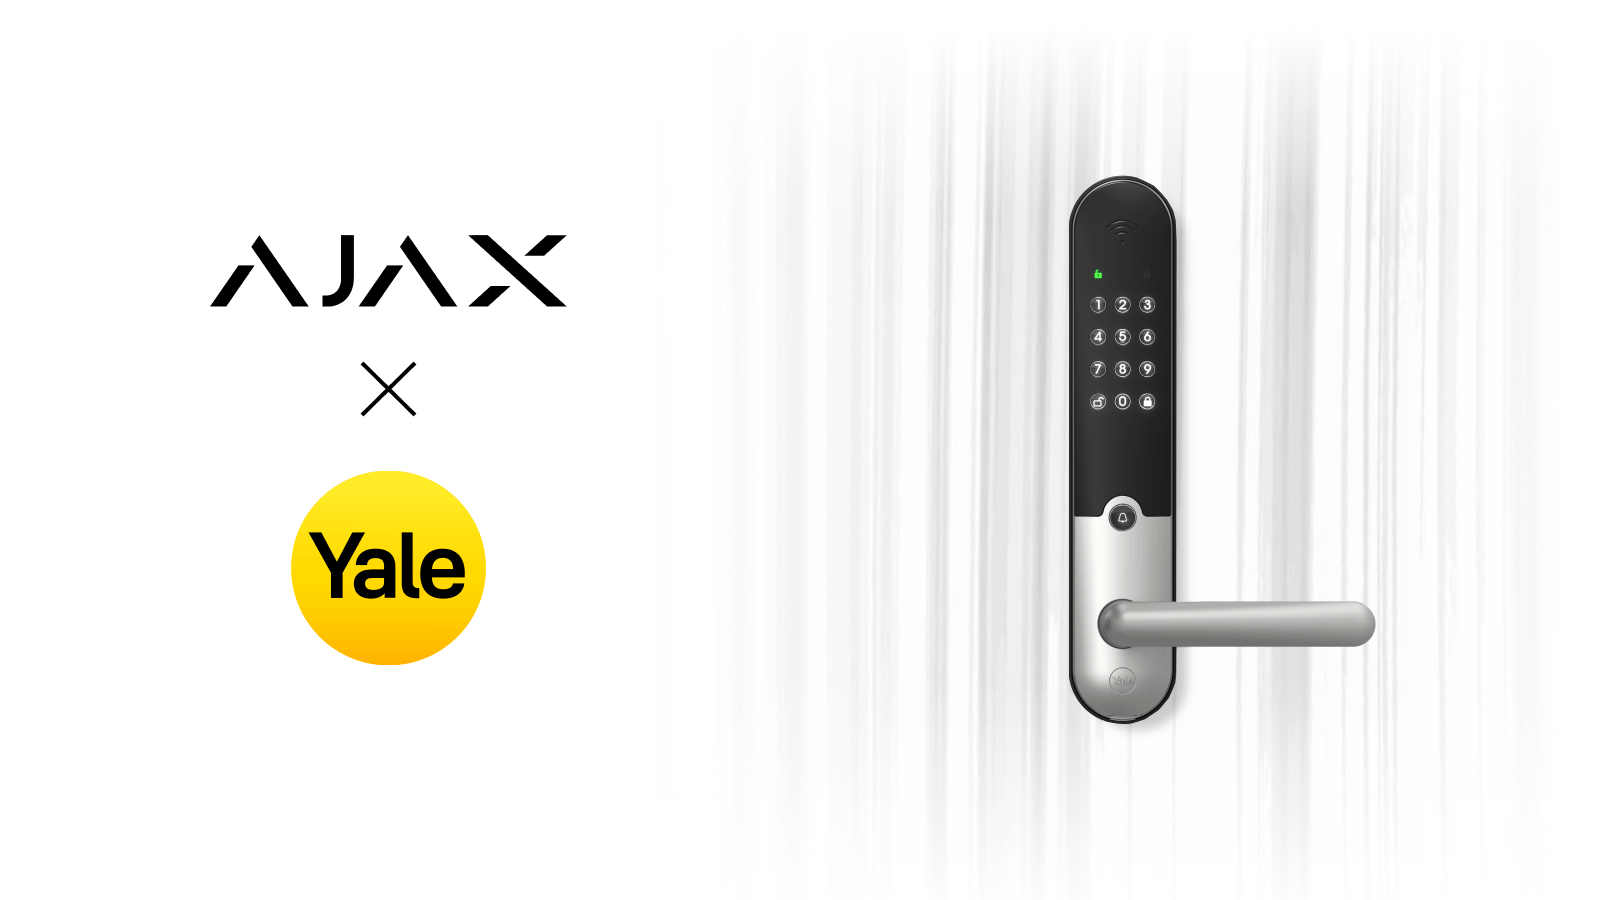 Yale smart locks are now in the Ajax ecosystem